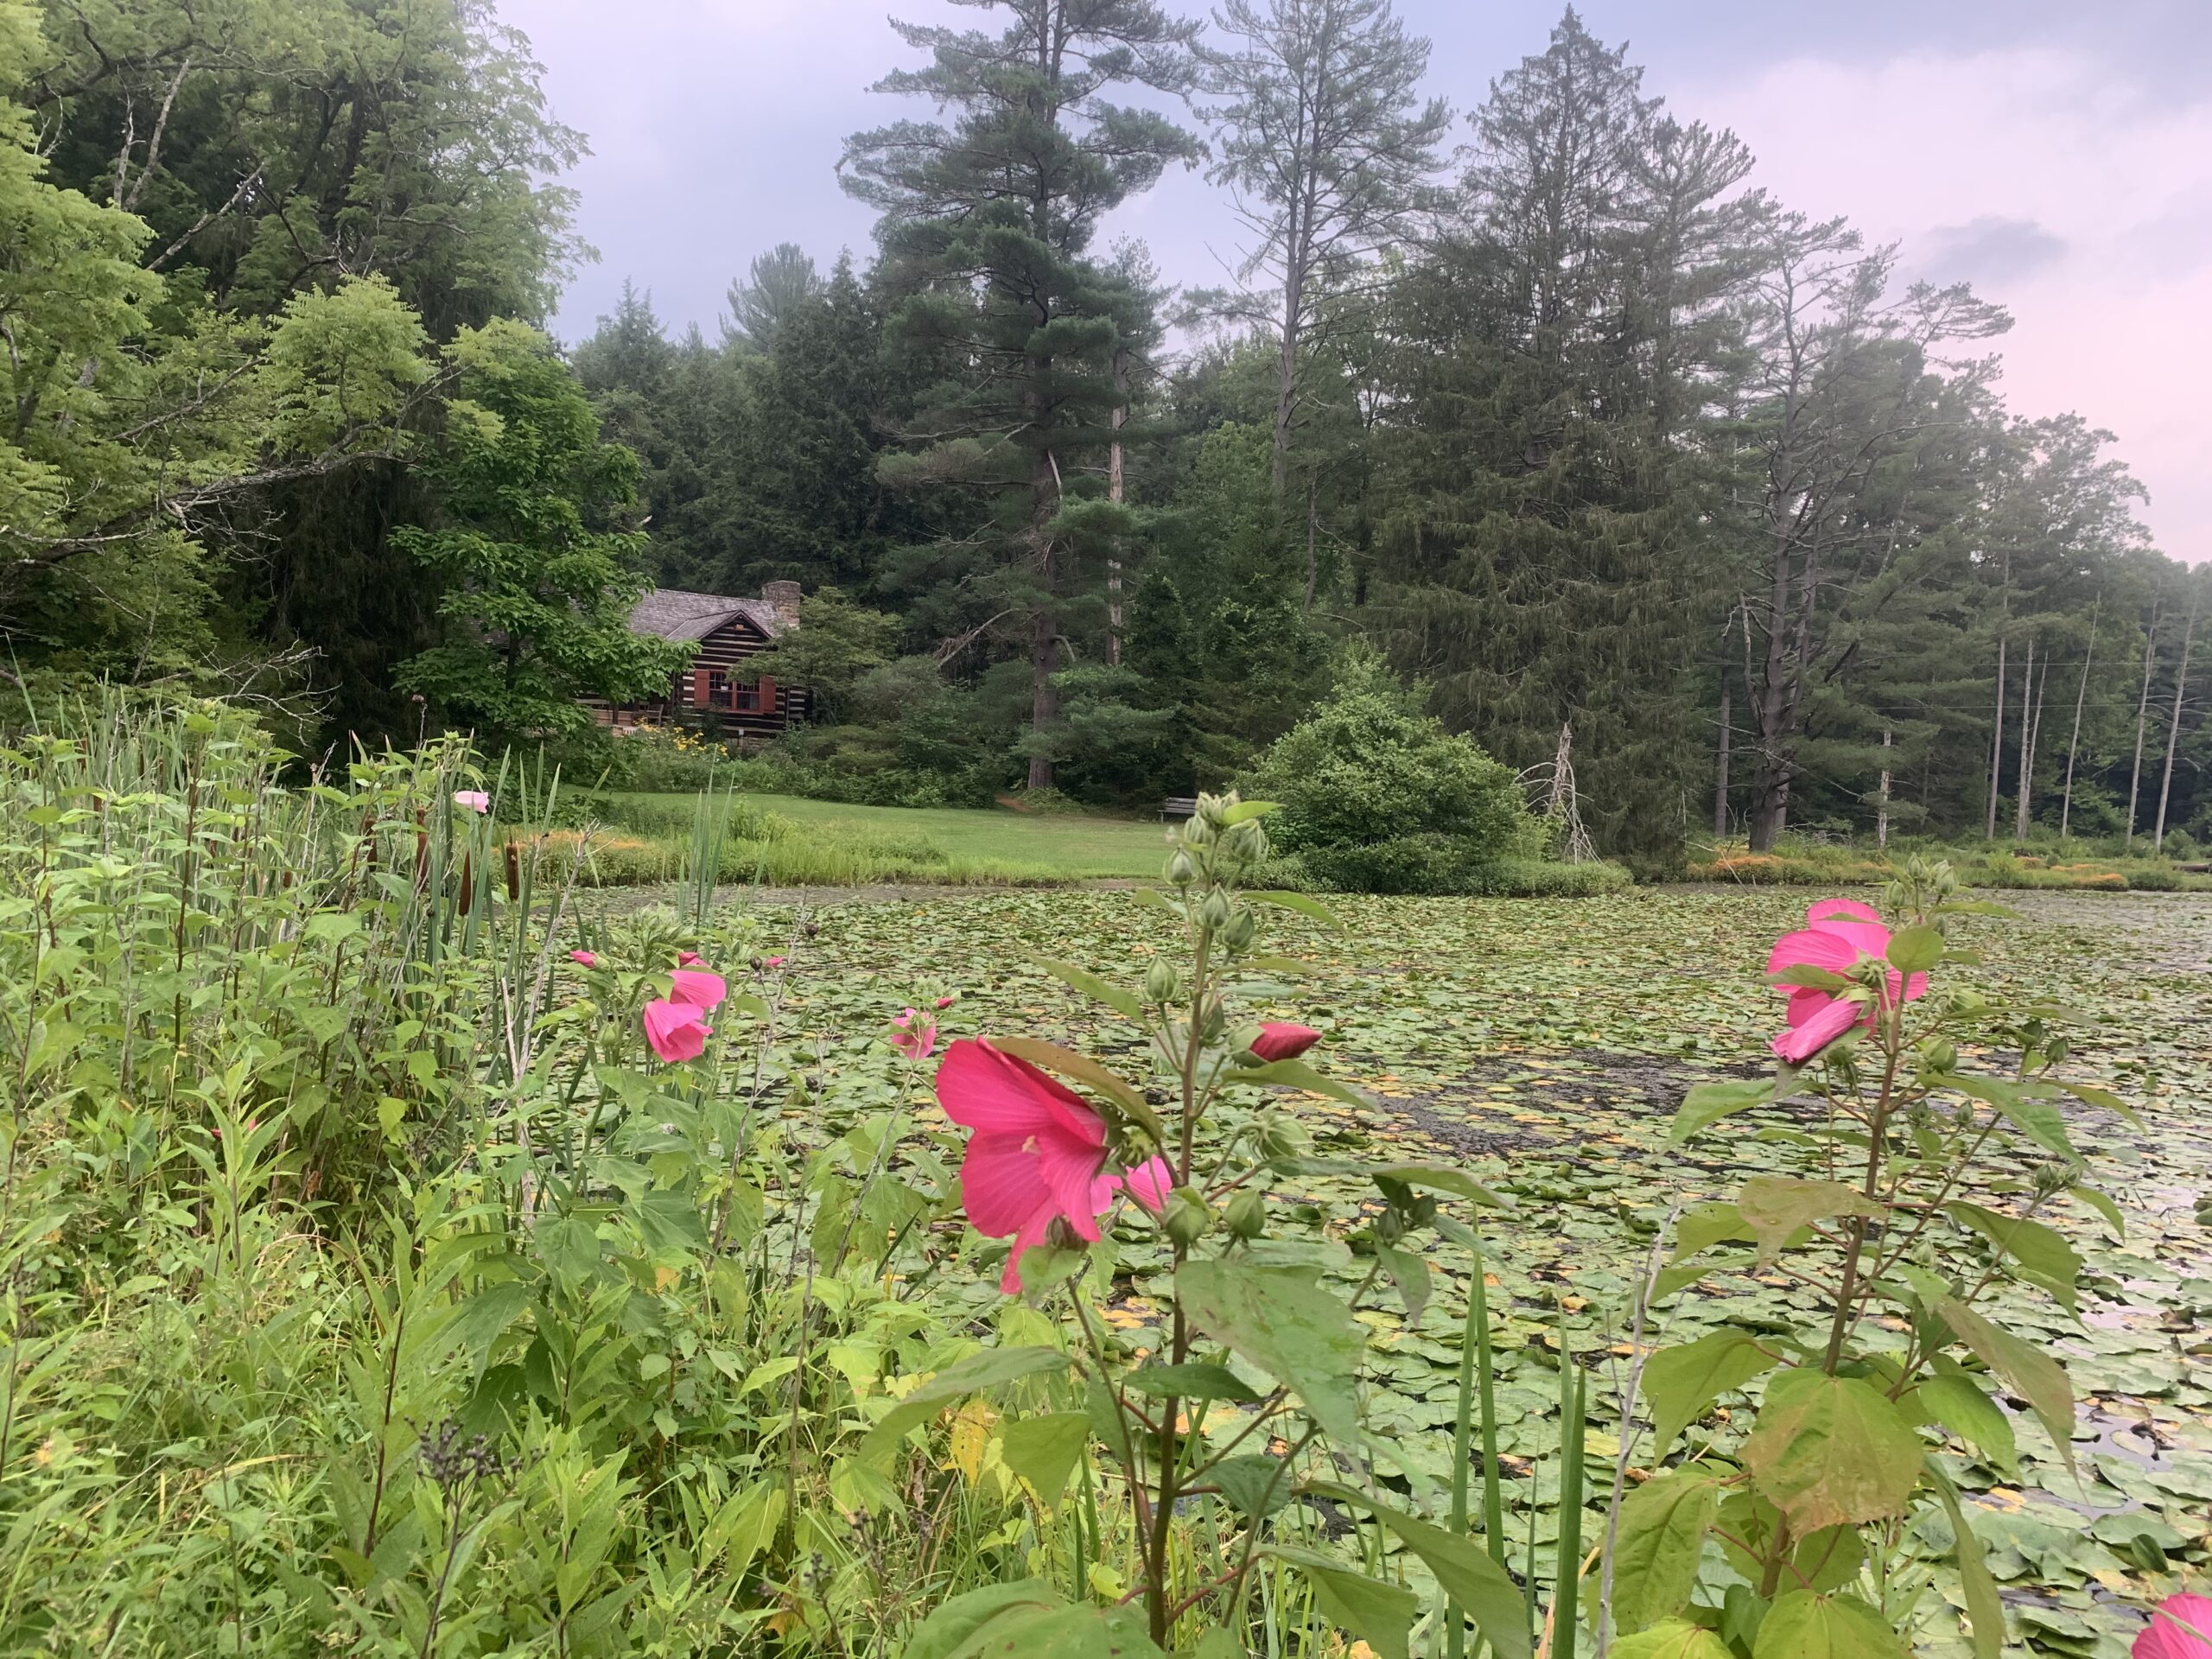 Lake covered in lily pads with a cabin in the background